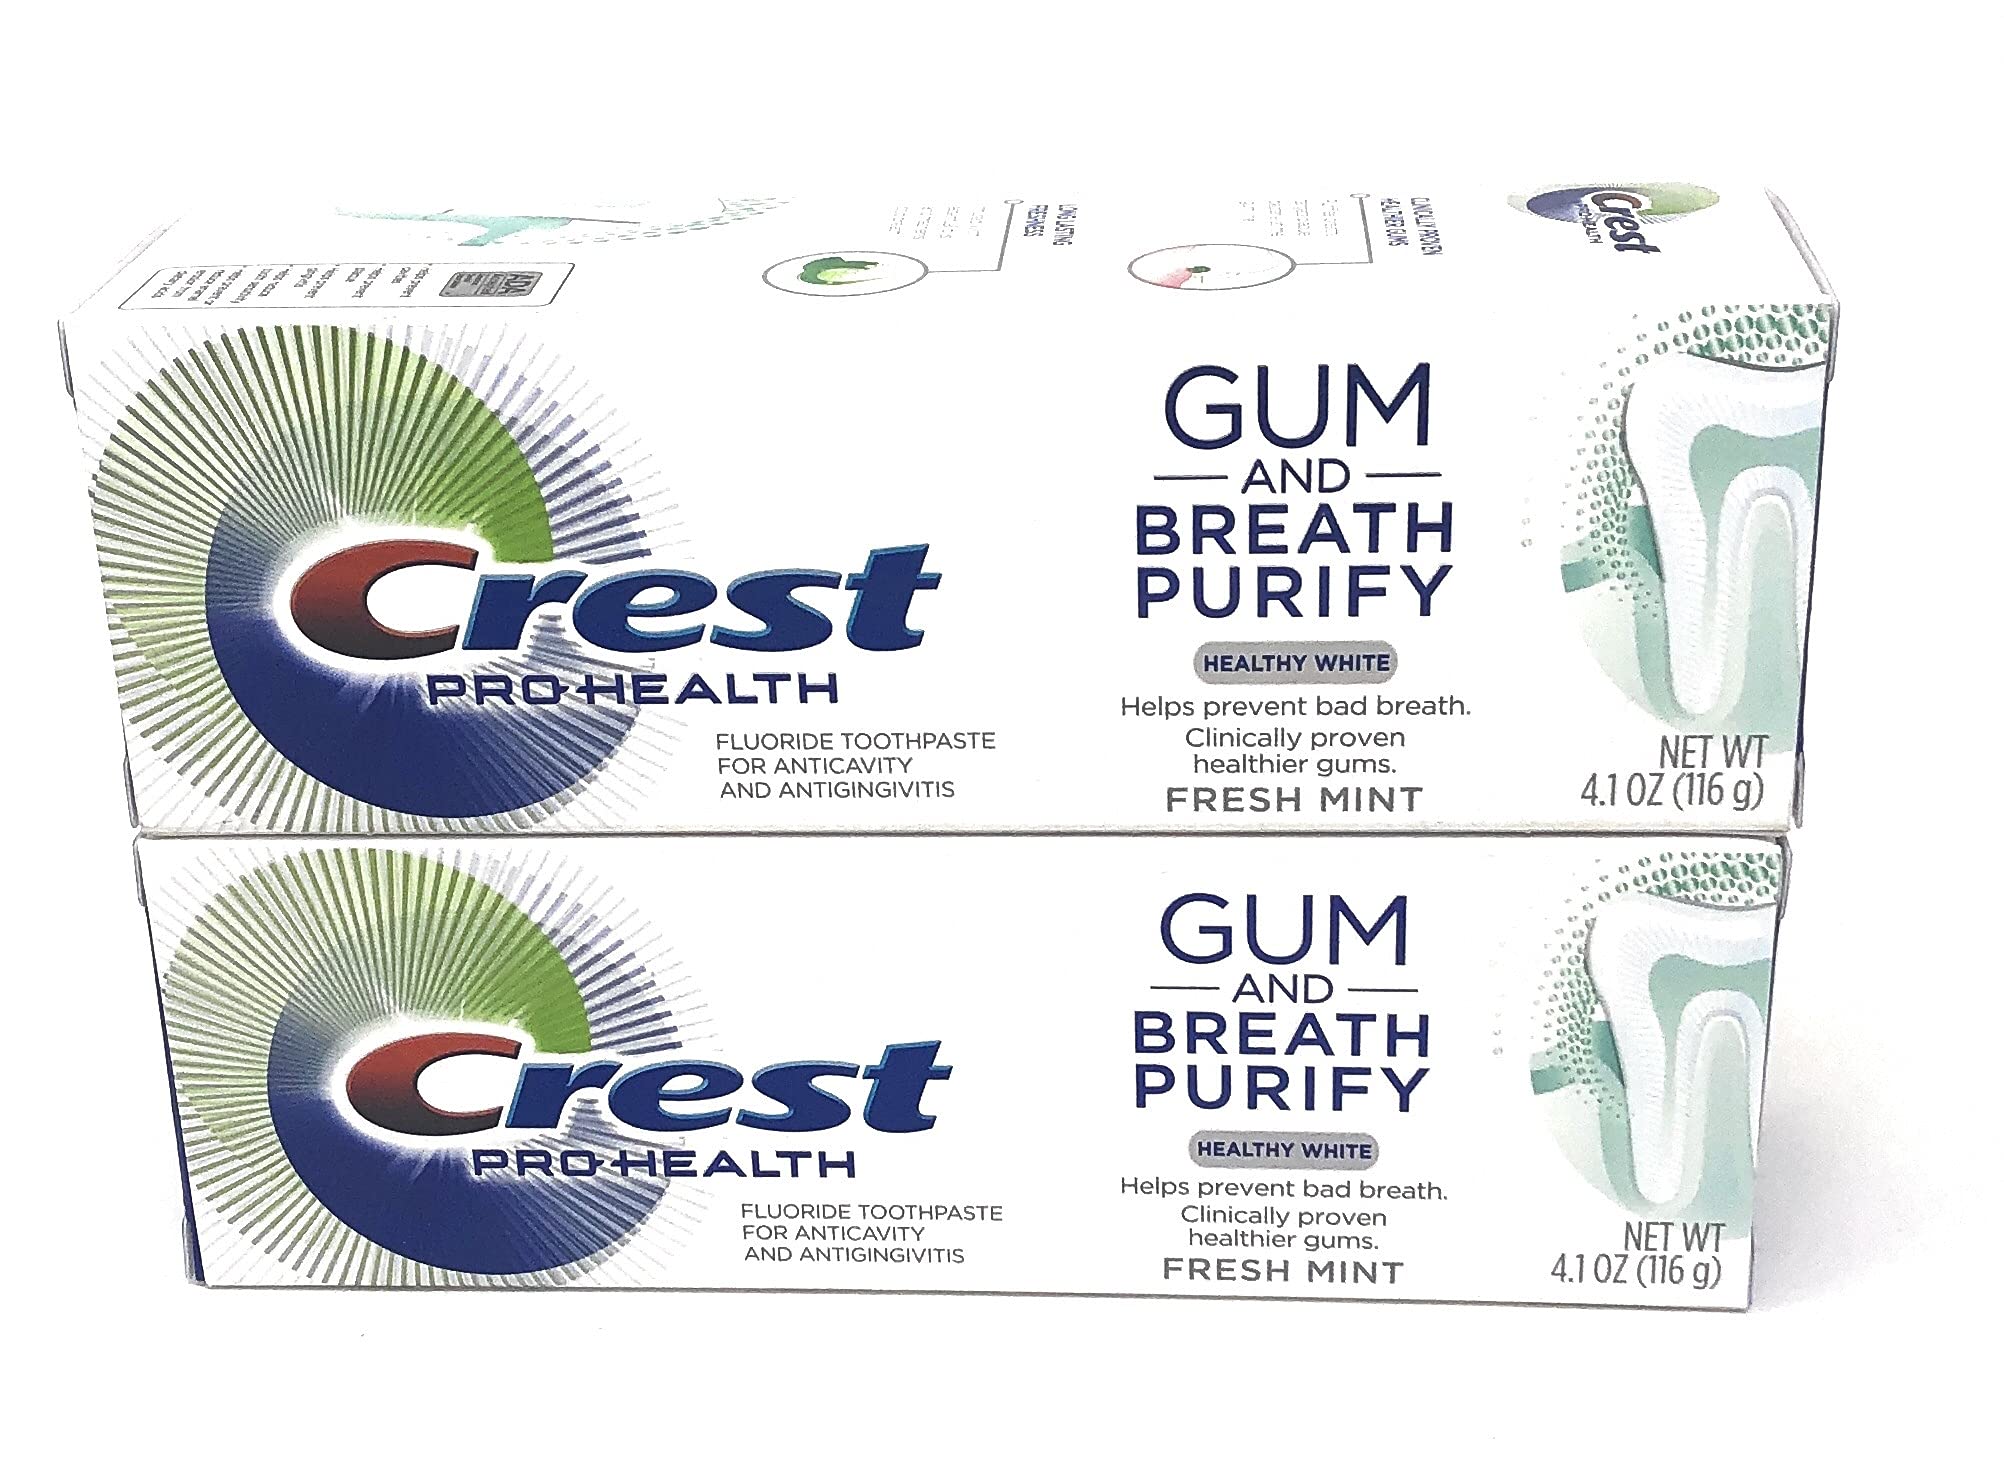 Crest Gum and Breath Purify Whitening Toothpaste